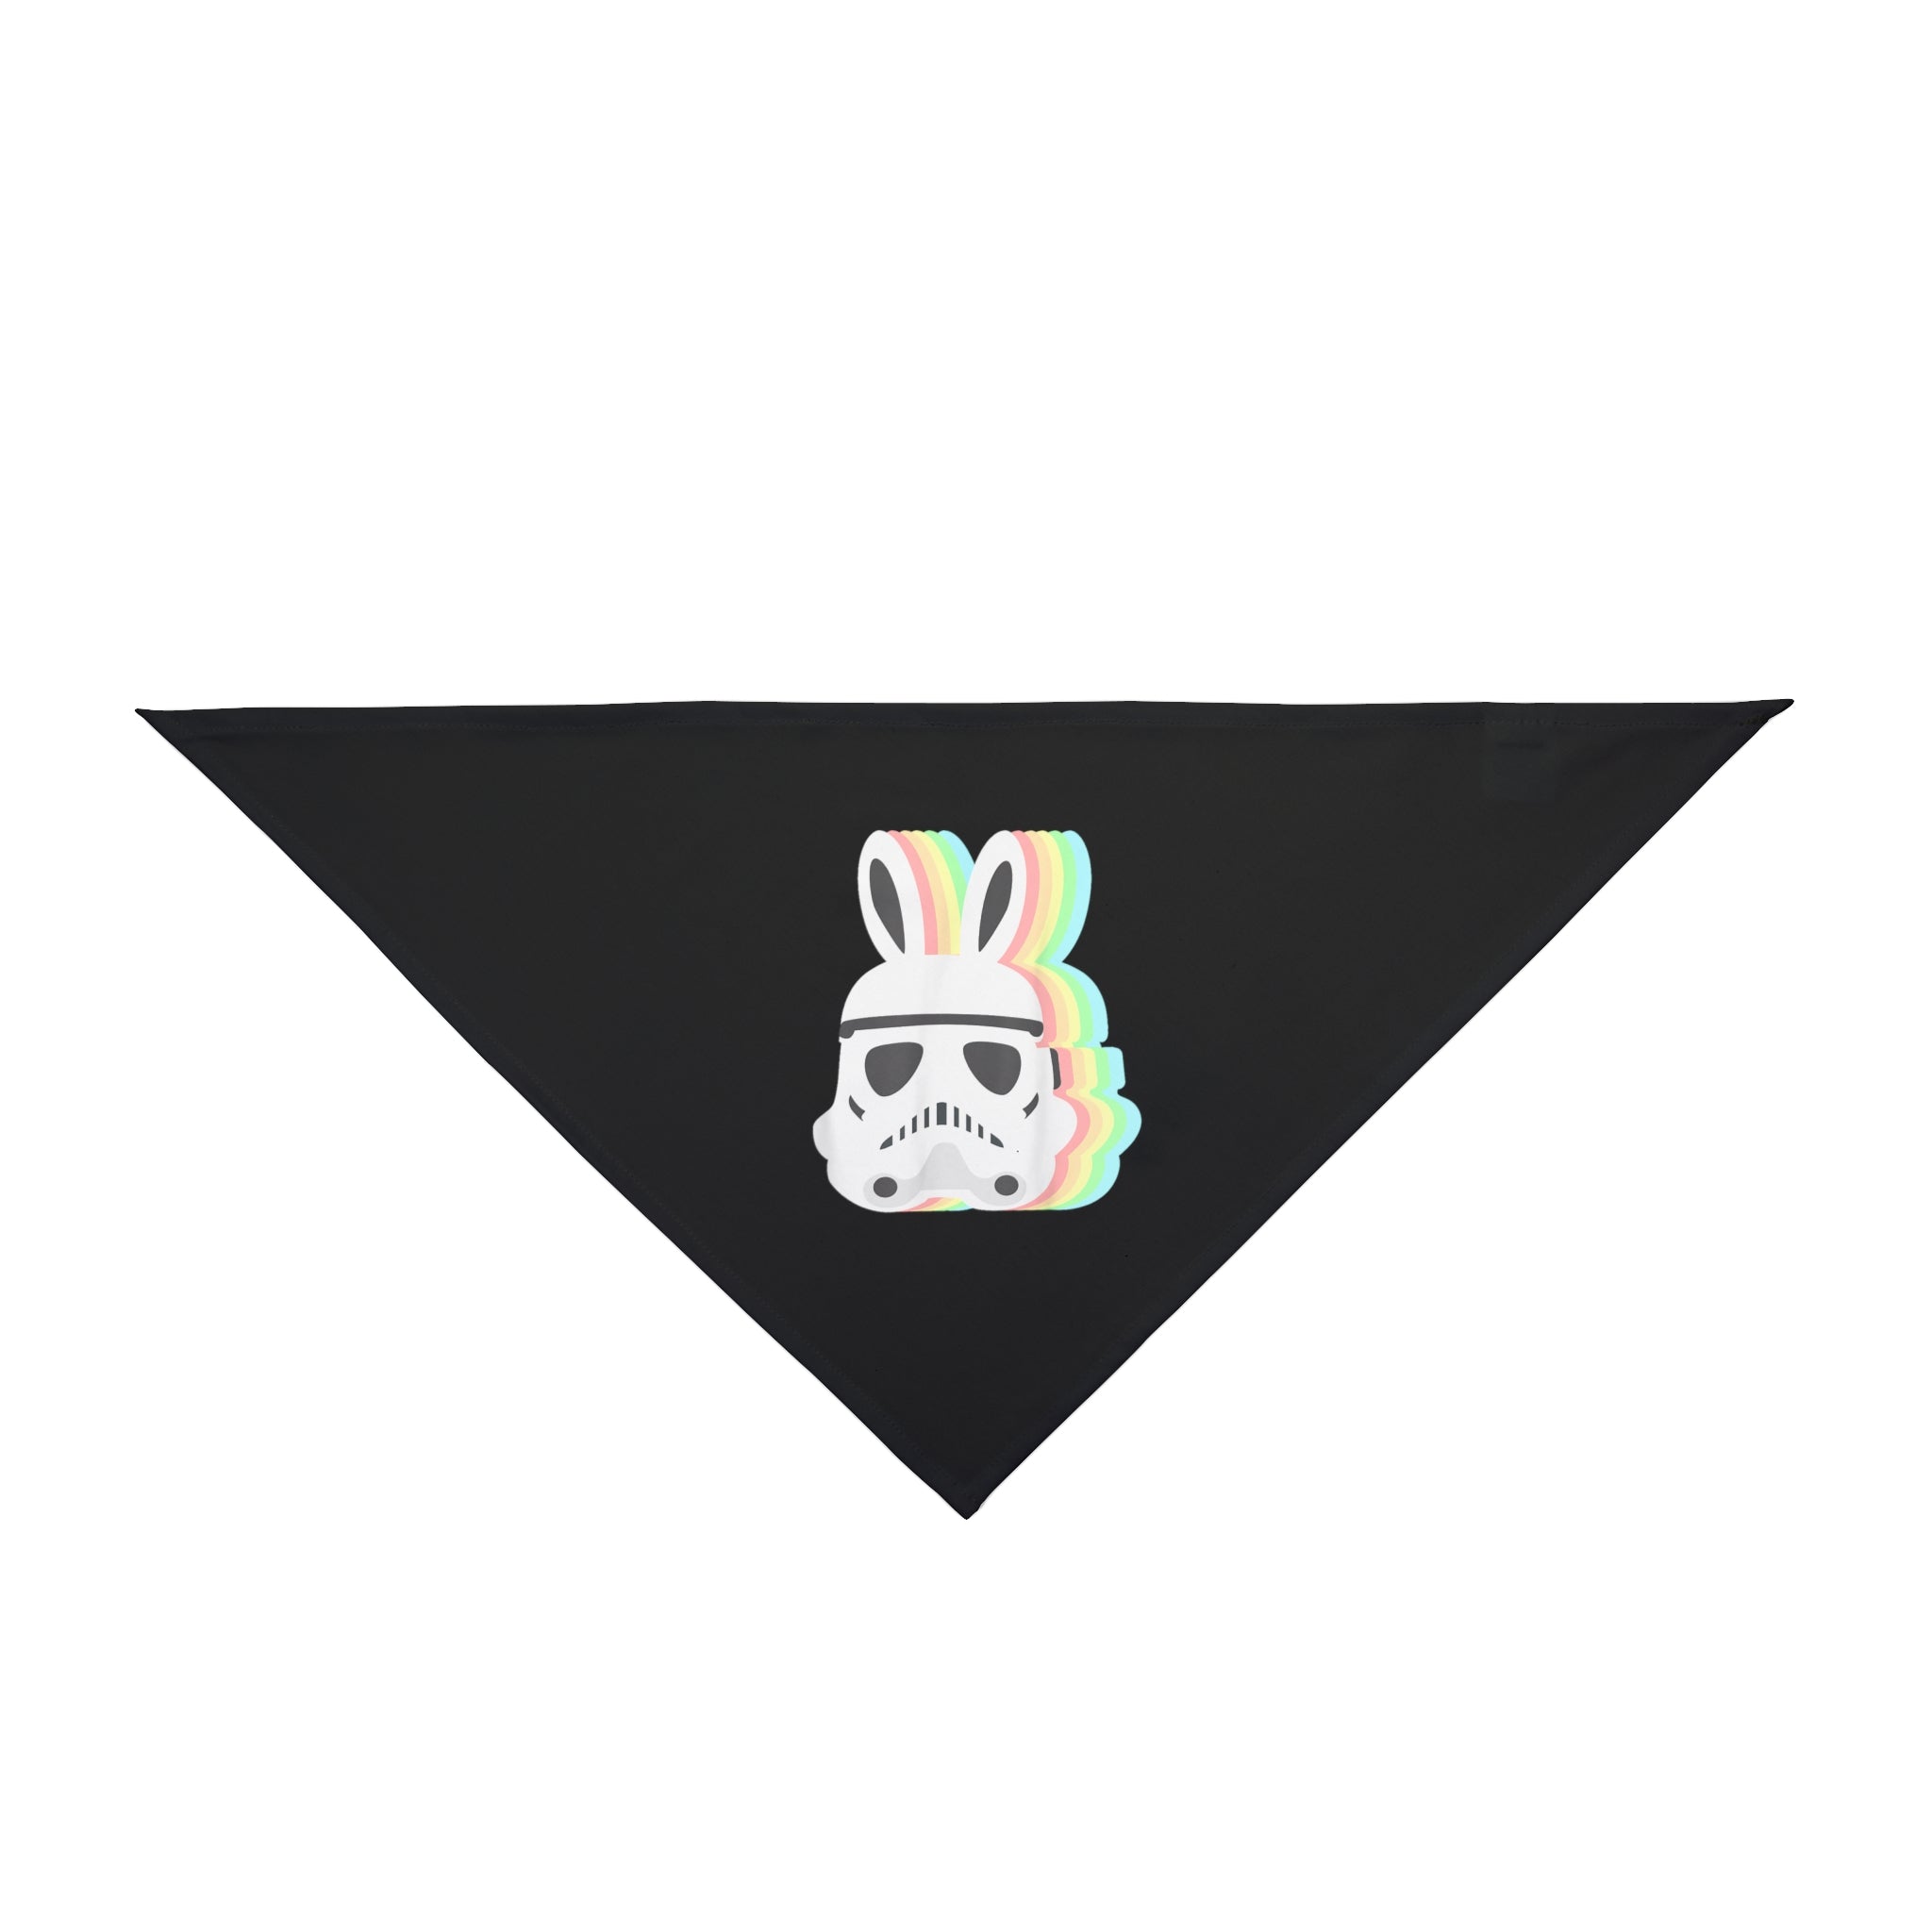 A black triangular Star Wars Easter Stormtrooper - Pet Bandana featuring a design of a Star Wars Stormtrooper helmet with colorful bunny ears, perfect for Easter.